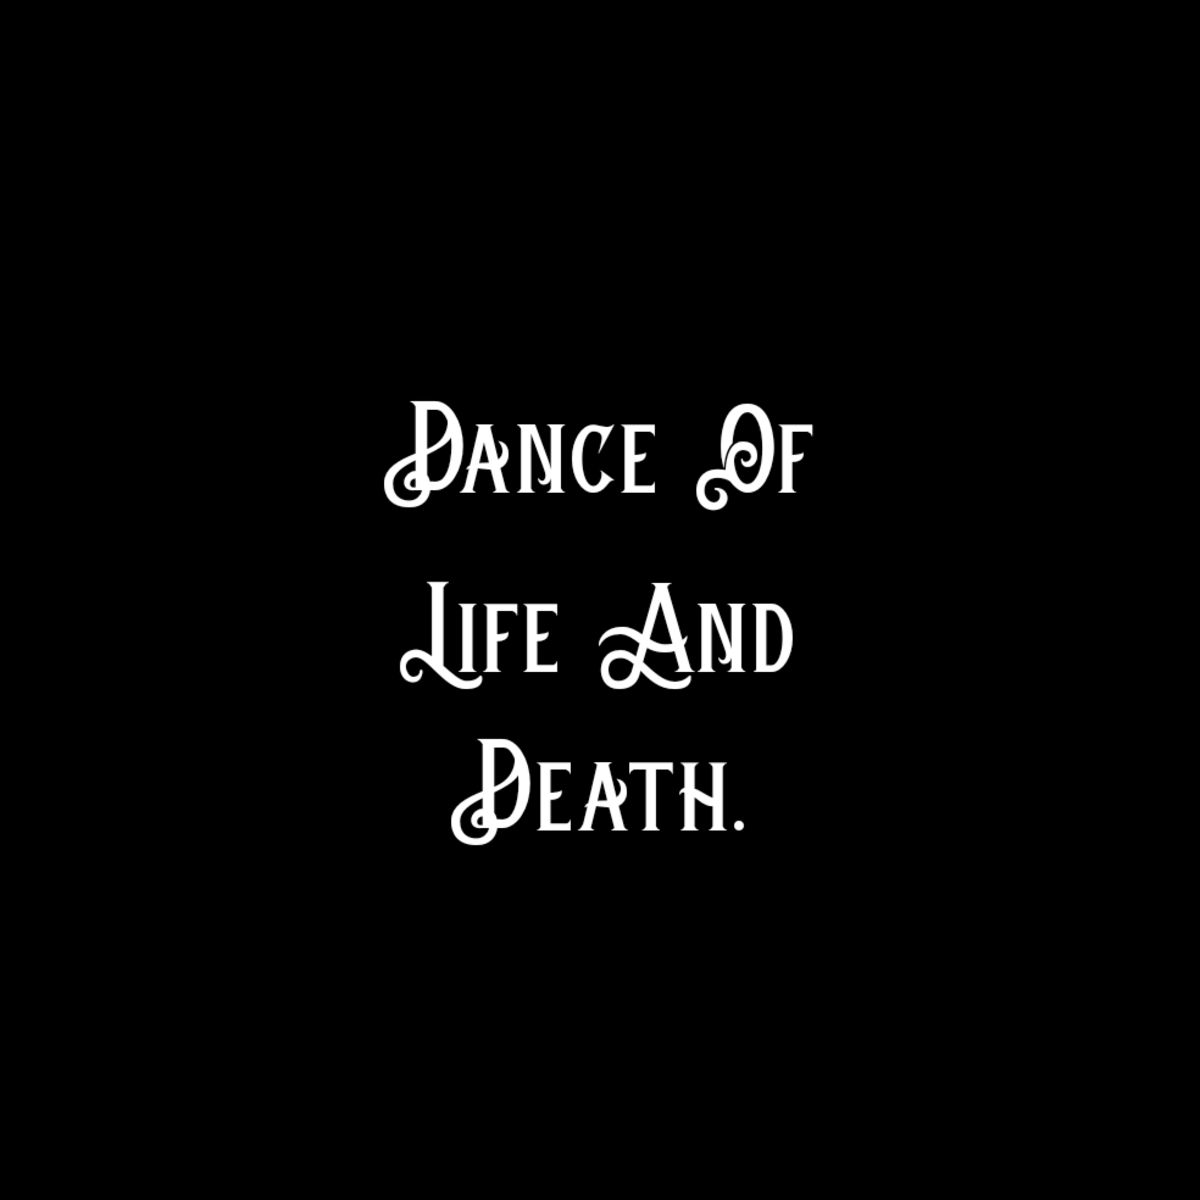 Dance of Life and Death.